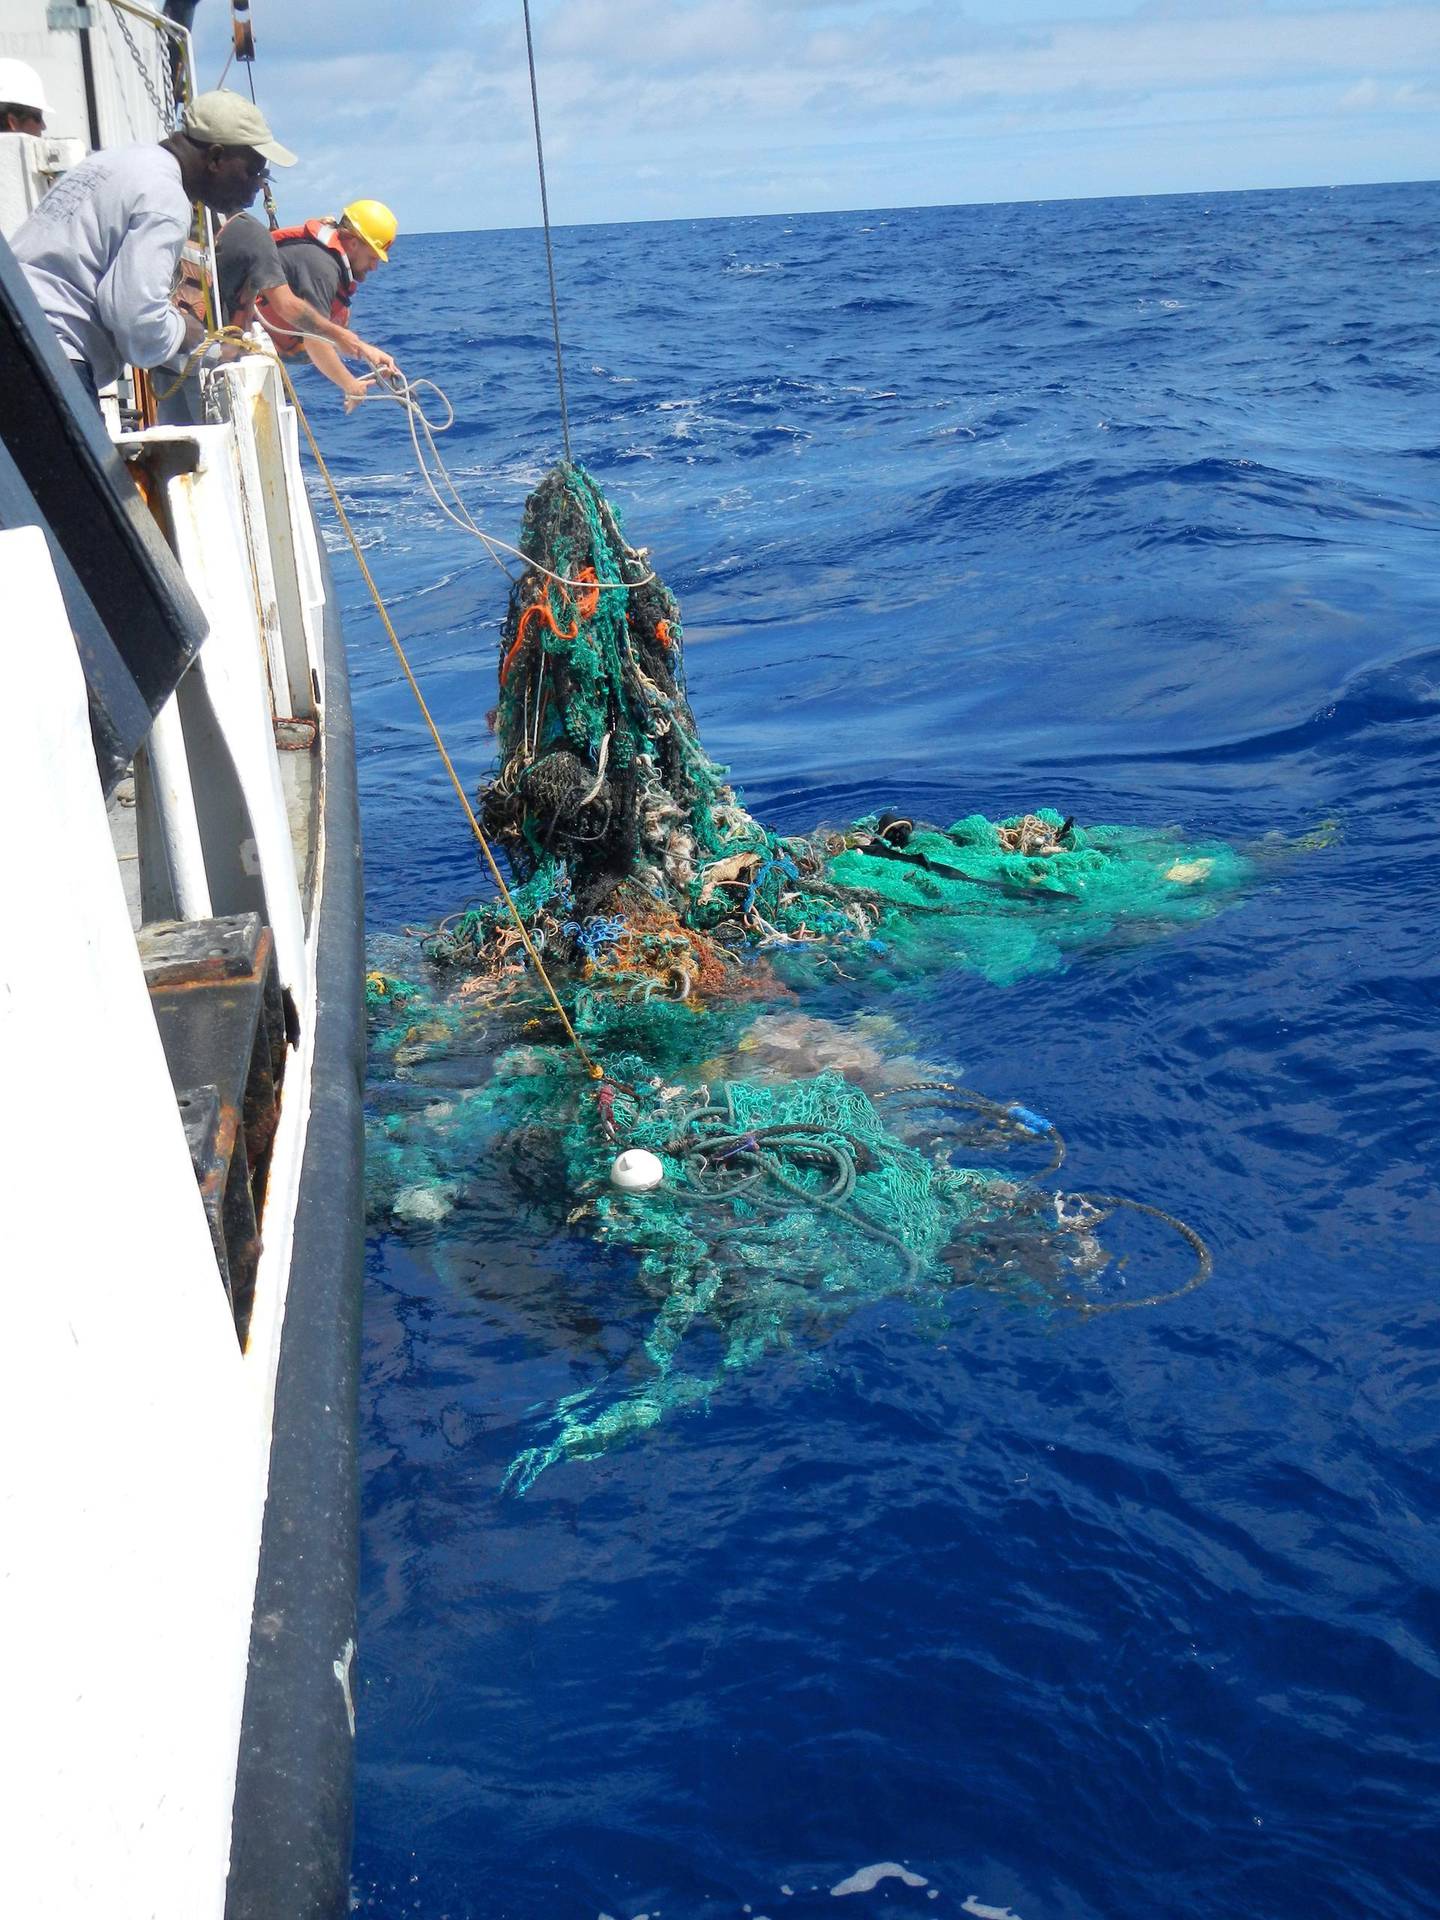 (FILES) This handout photo released on March 22, 2018 by the Ocean Cleanup shows Mega Expedition mothership R/V Ocean Starr crew pulling a ghost net from the Pacific Ocean in 2015. 
Researchers in the US and Britain have accidentally engineered an enzyme which eats plastic and may eventually help solve the growing problem of plastic pollution, a study said on April 17, 2018. More than eight million tons of plastic are dumped into the world's oceans every year, and concern is mounting over this petroleum-derived product's toxic legacy on human health and the environment. / AFP PHOTO / Ocean Cleanup / Handout / RESTRICTED TO EDITORIAL USE - MANDATORY CREDIT "AFP PHOTO / OCEAN CLEANUP" - NO MARKETING NO ADVERTISING CAMPAIGNS - DISTRIBUTED AS A SERVICE TO CLIENTS